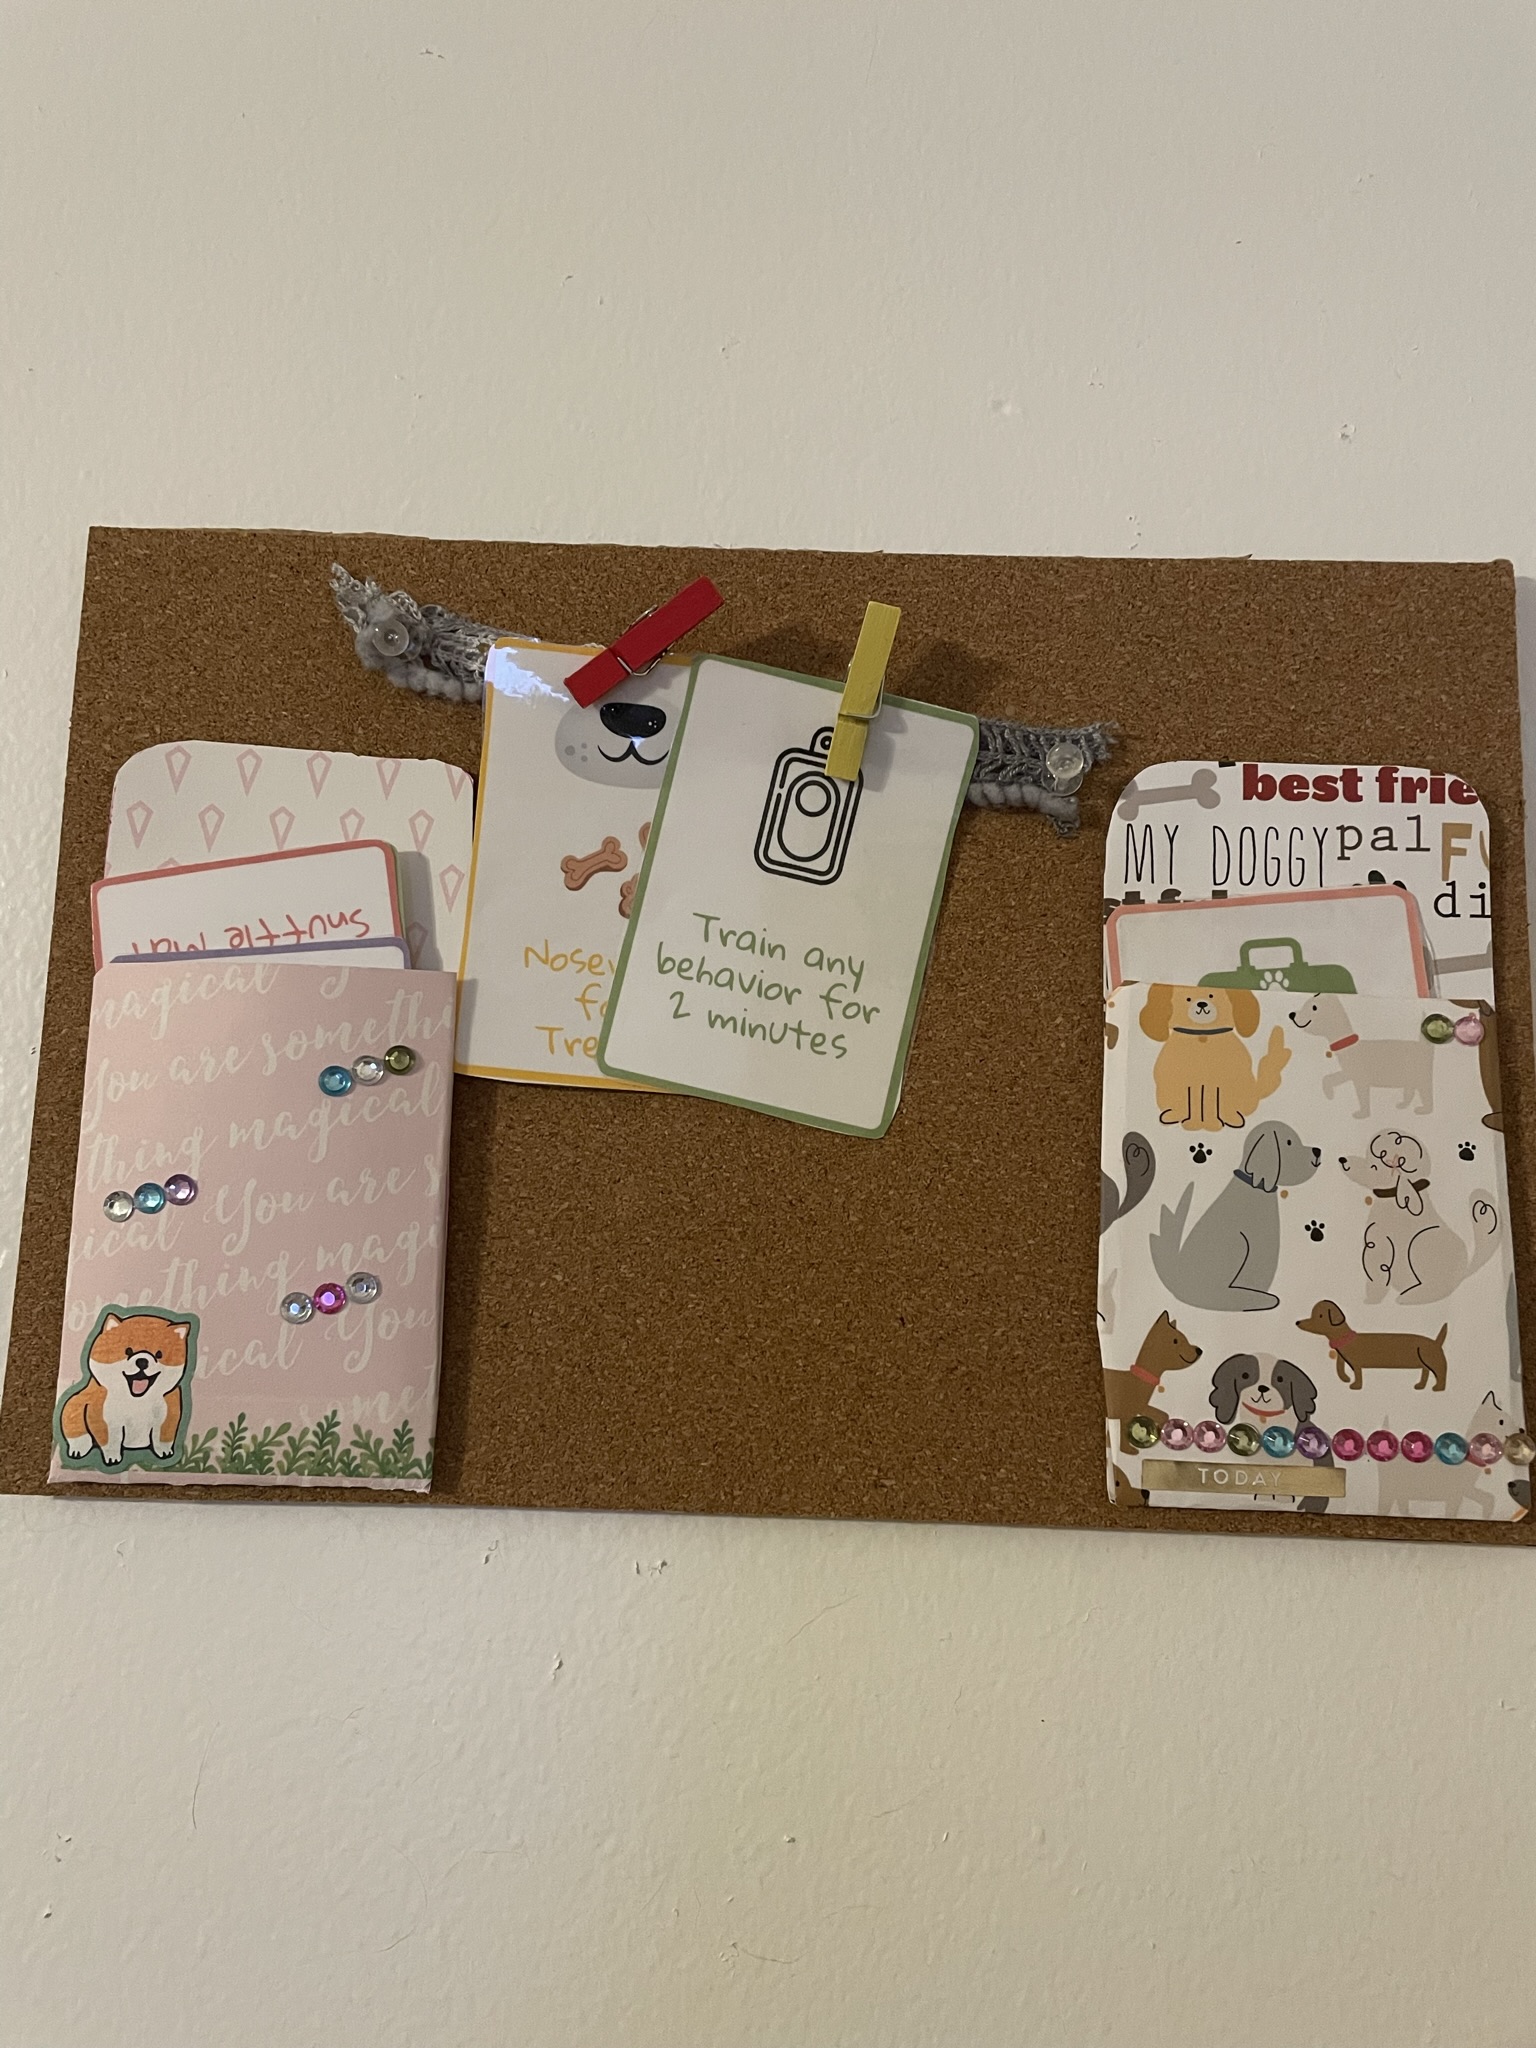 A cork board with two library style envelopes made of scrapbook paper stuck on. Between the envelopes is a grey piece of yarn with two cards clipped to it. One says train any behavior for two minutes with a clipart image of a clicker. The other says nosework for treats with a dog nose image on it.